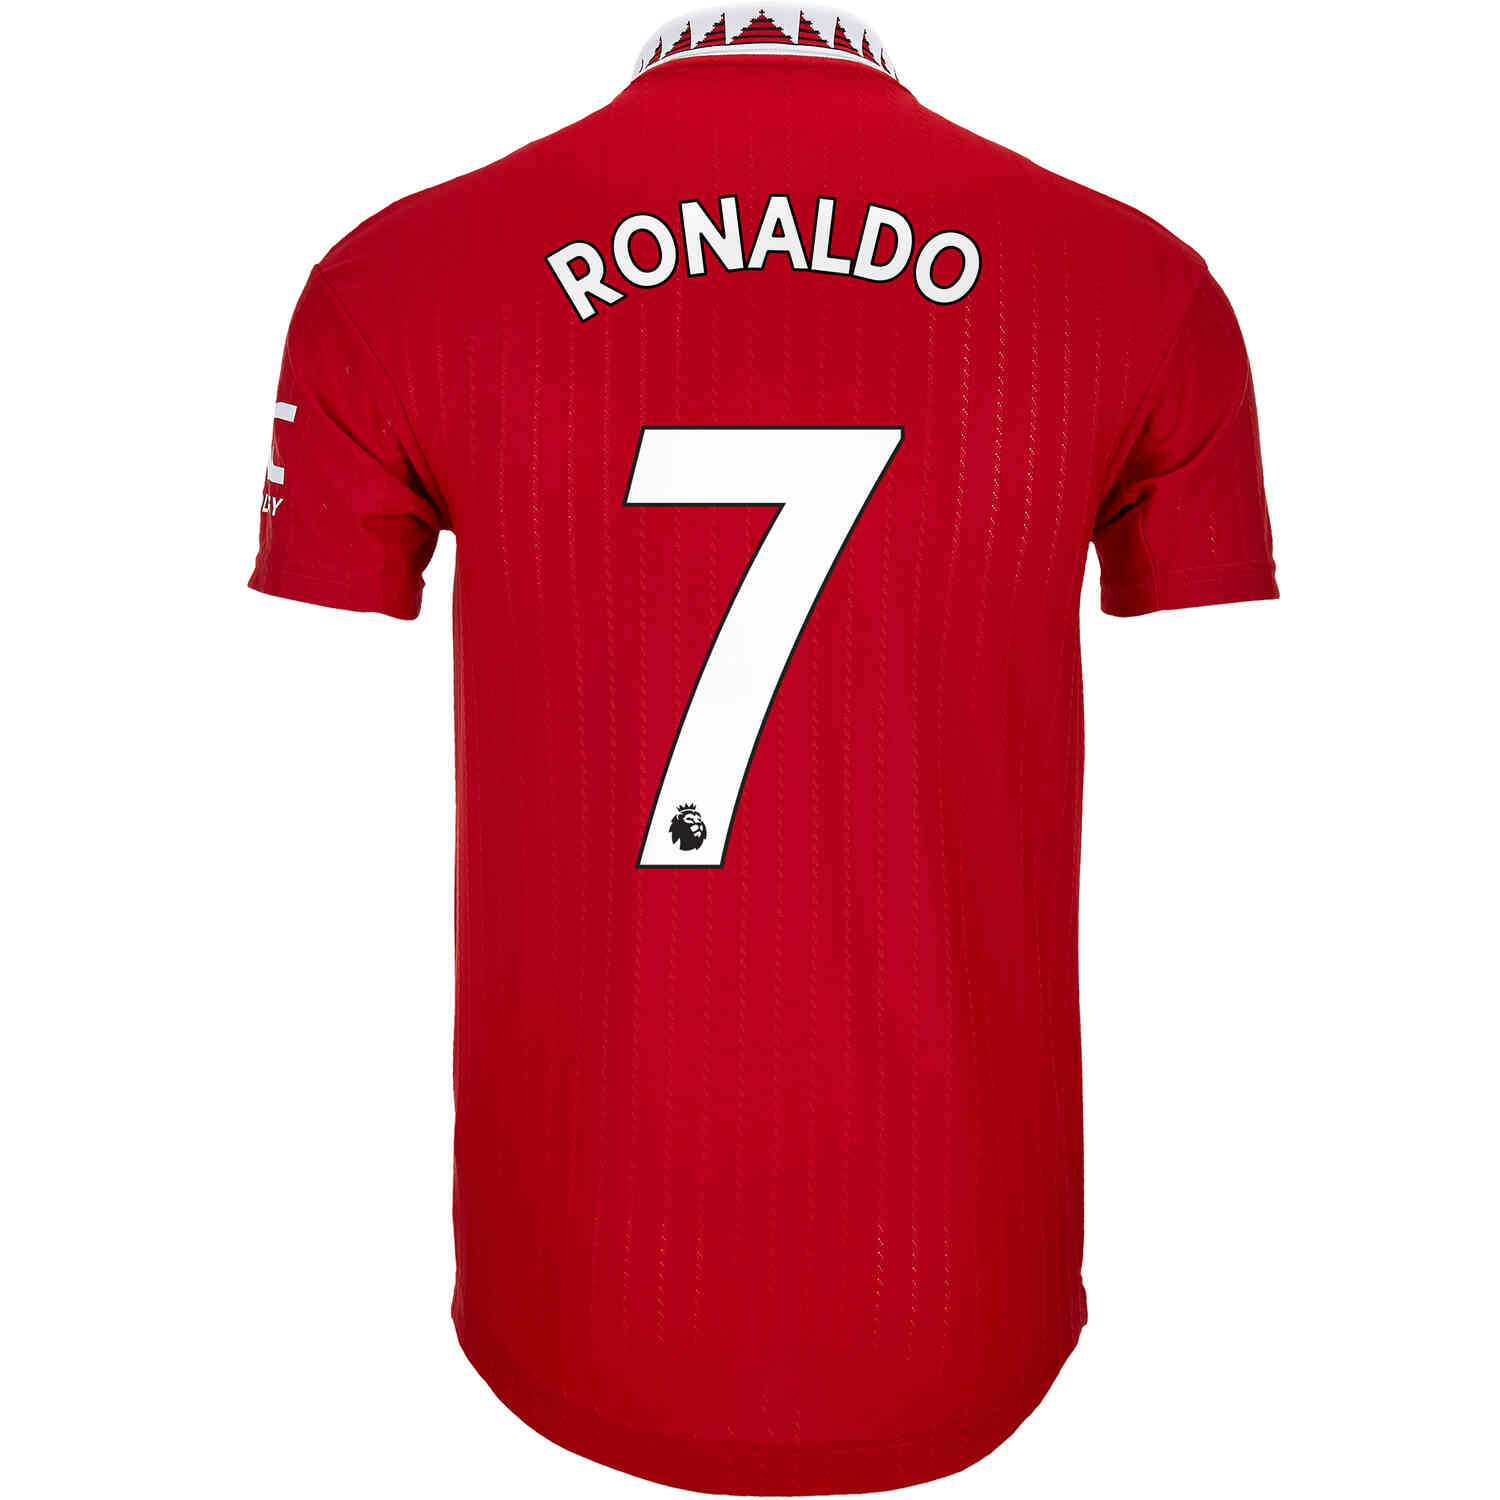 cr7 jersey manchester united